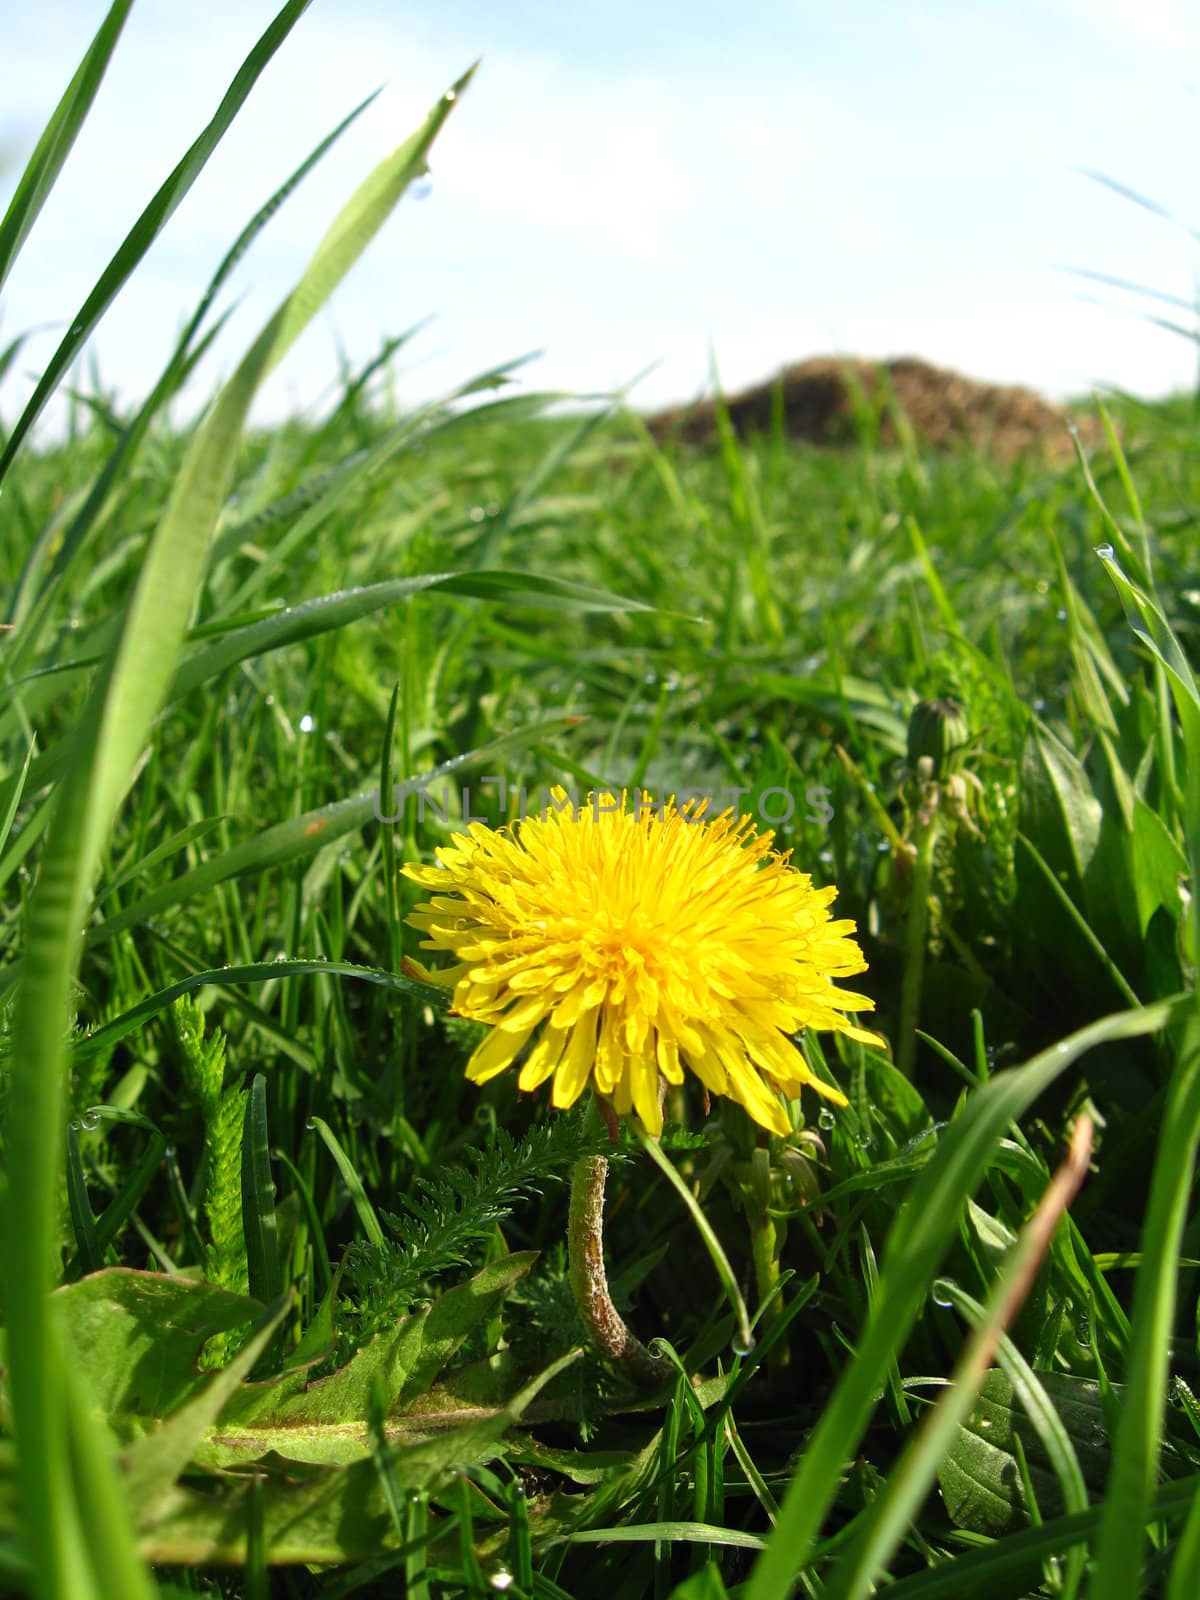 Unique dandelion on a background of a green grass